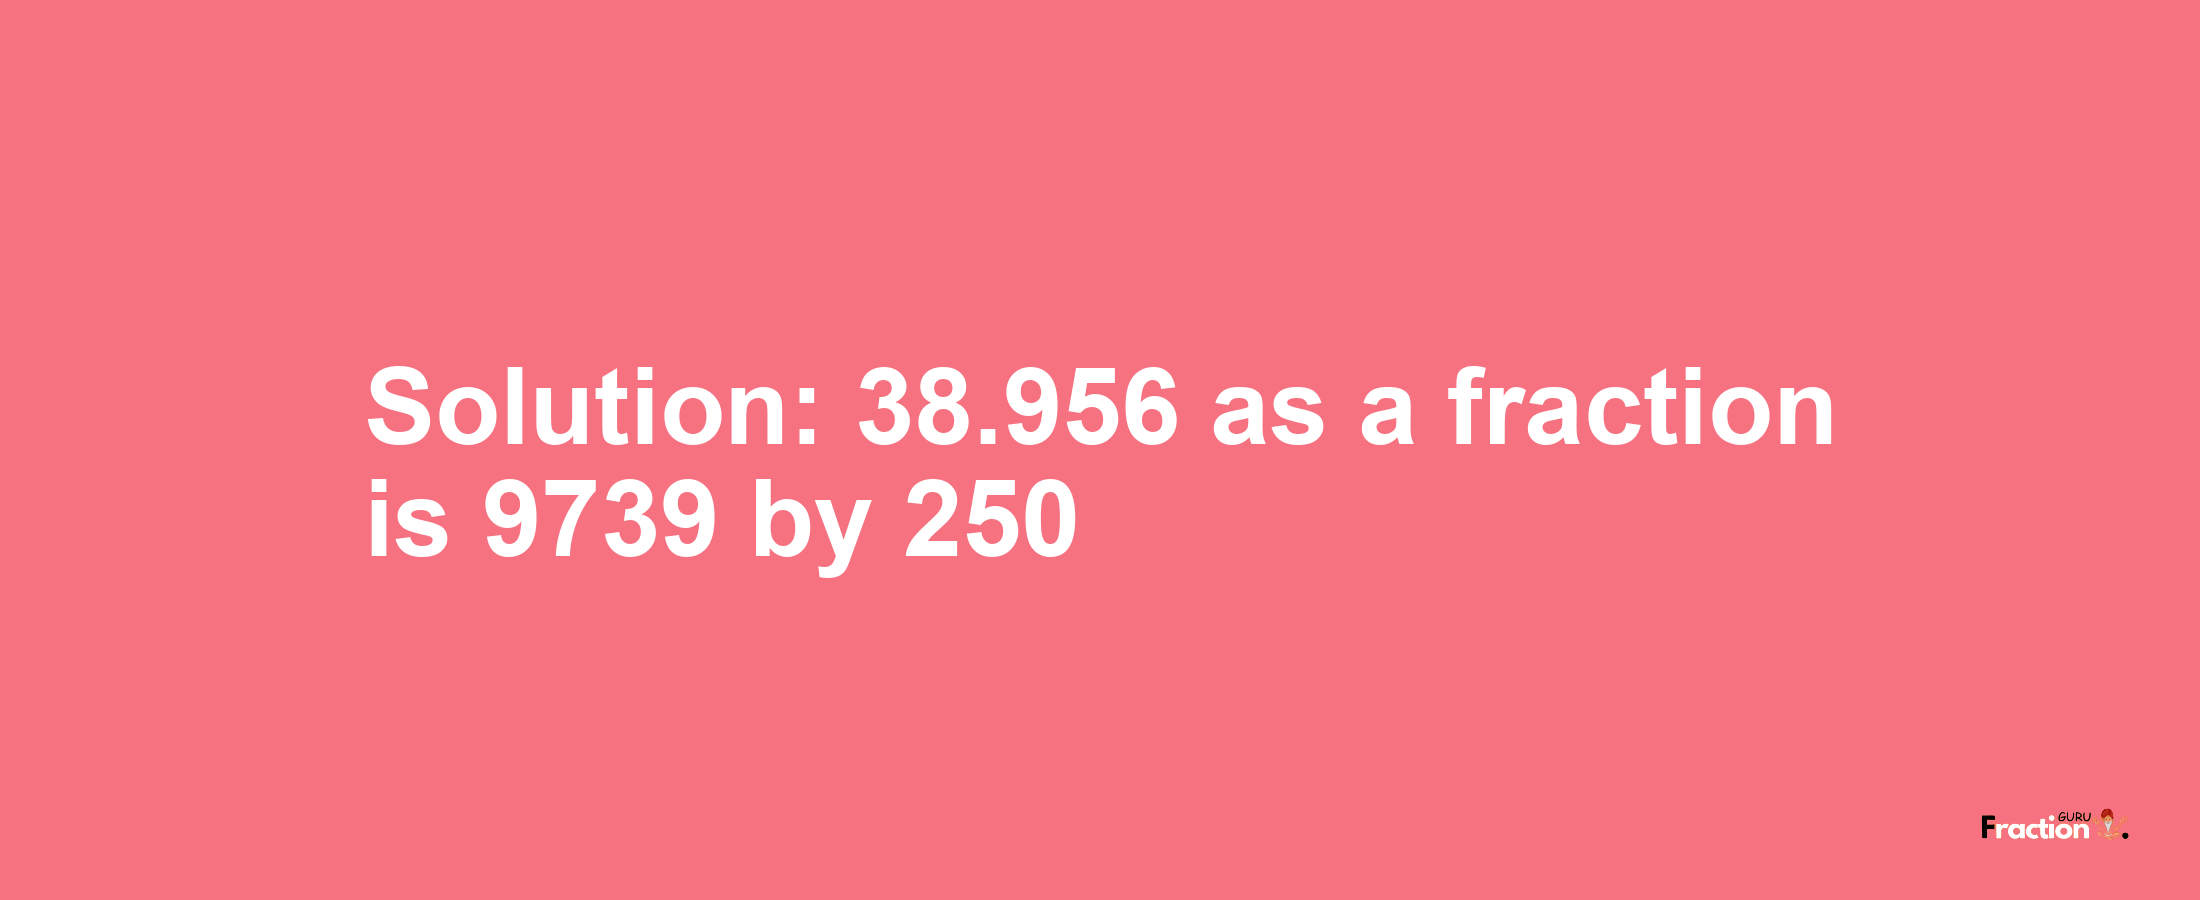 Solution:38.956 as a fraction is 9739/250